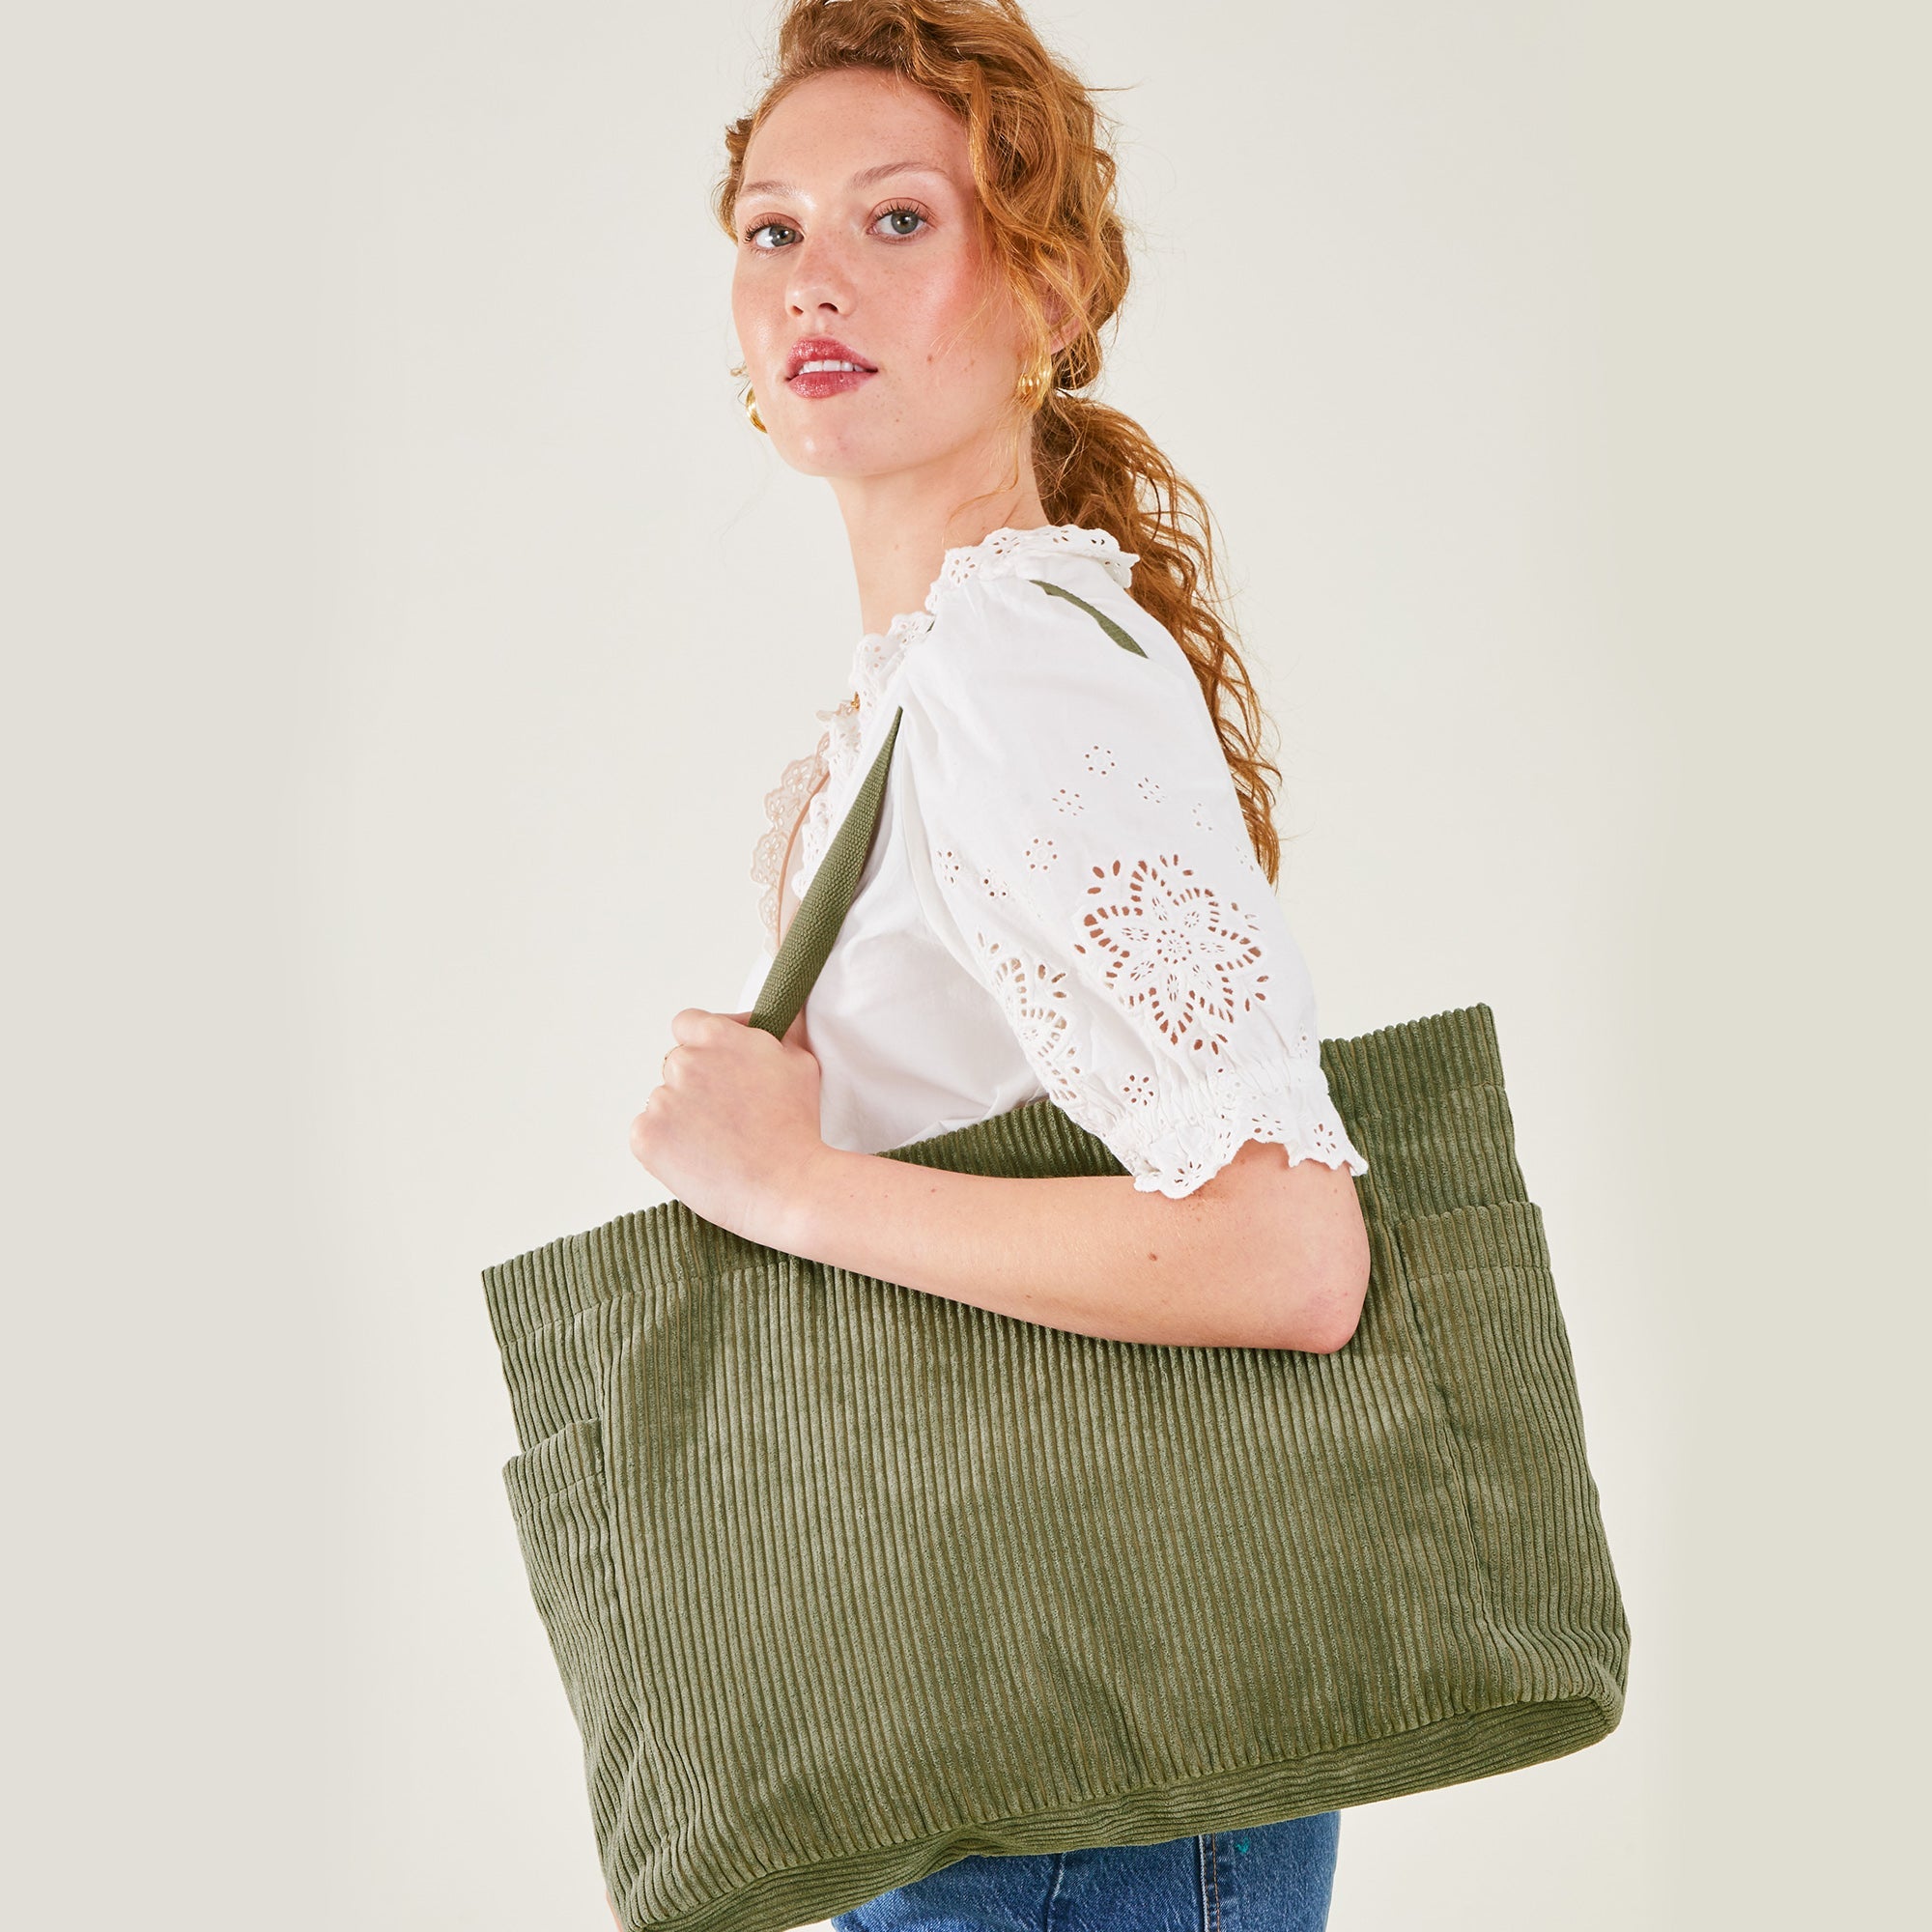 Tote Bags  Buy Tote Bags for Women Online - Accessorize India I18n Error:  Missing interpolation value page for Page {{ page }}